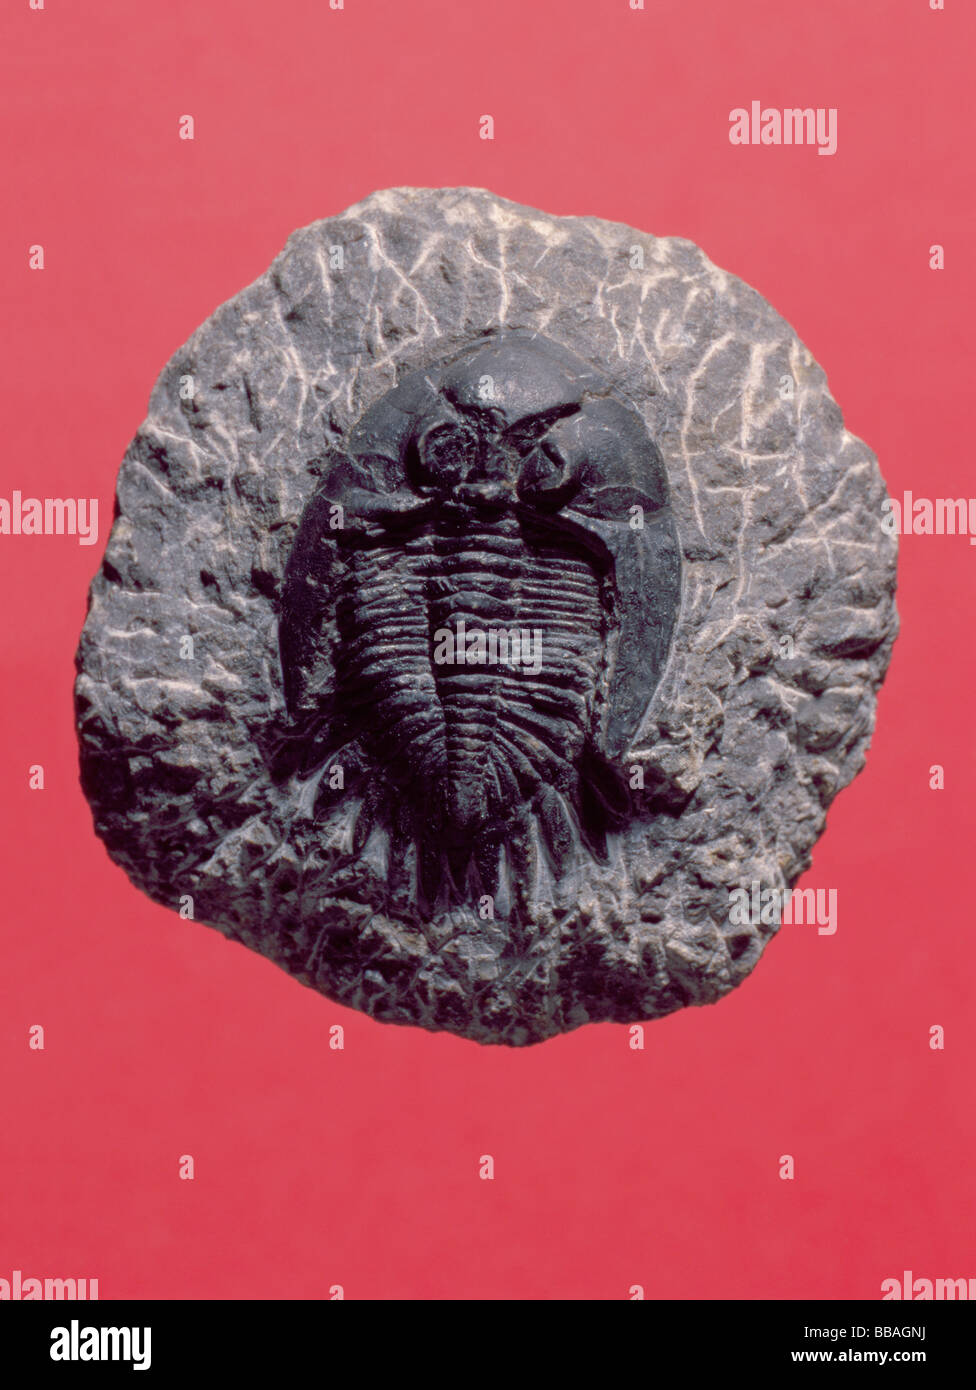 Fossil trilobite (Neometacanthina sp., Length 40mm, Devonian period), Morocco, North Africa. Stock Photo